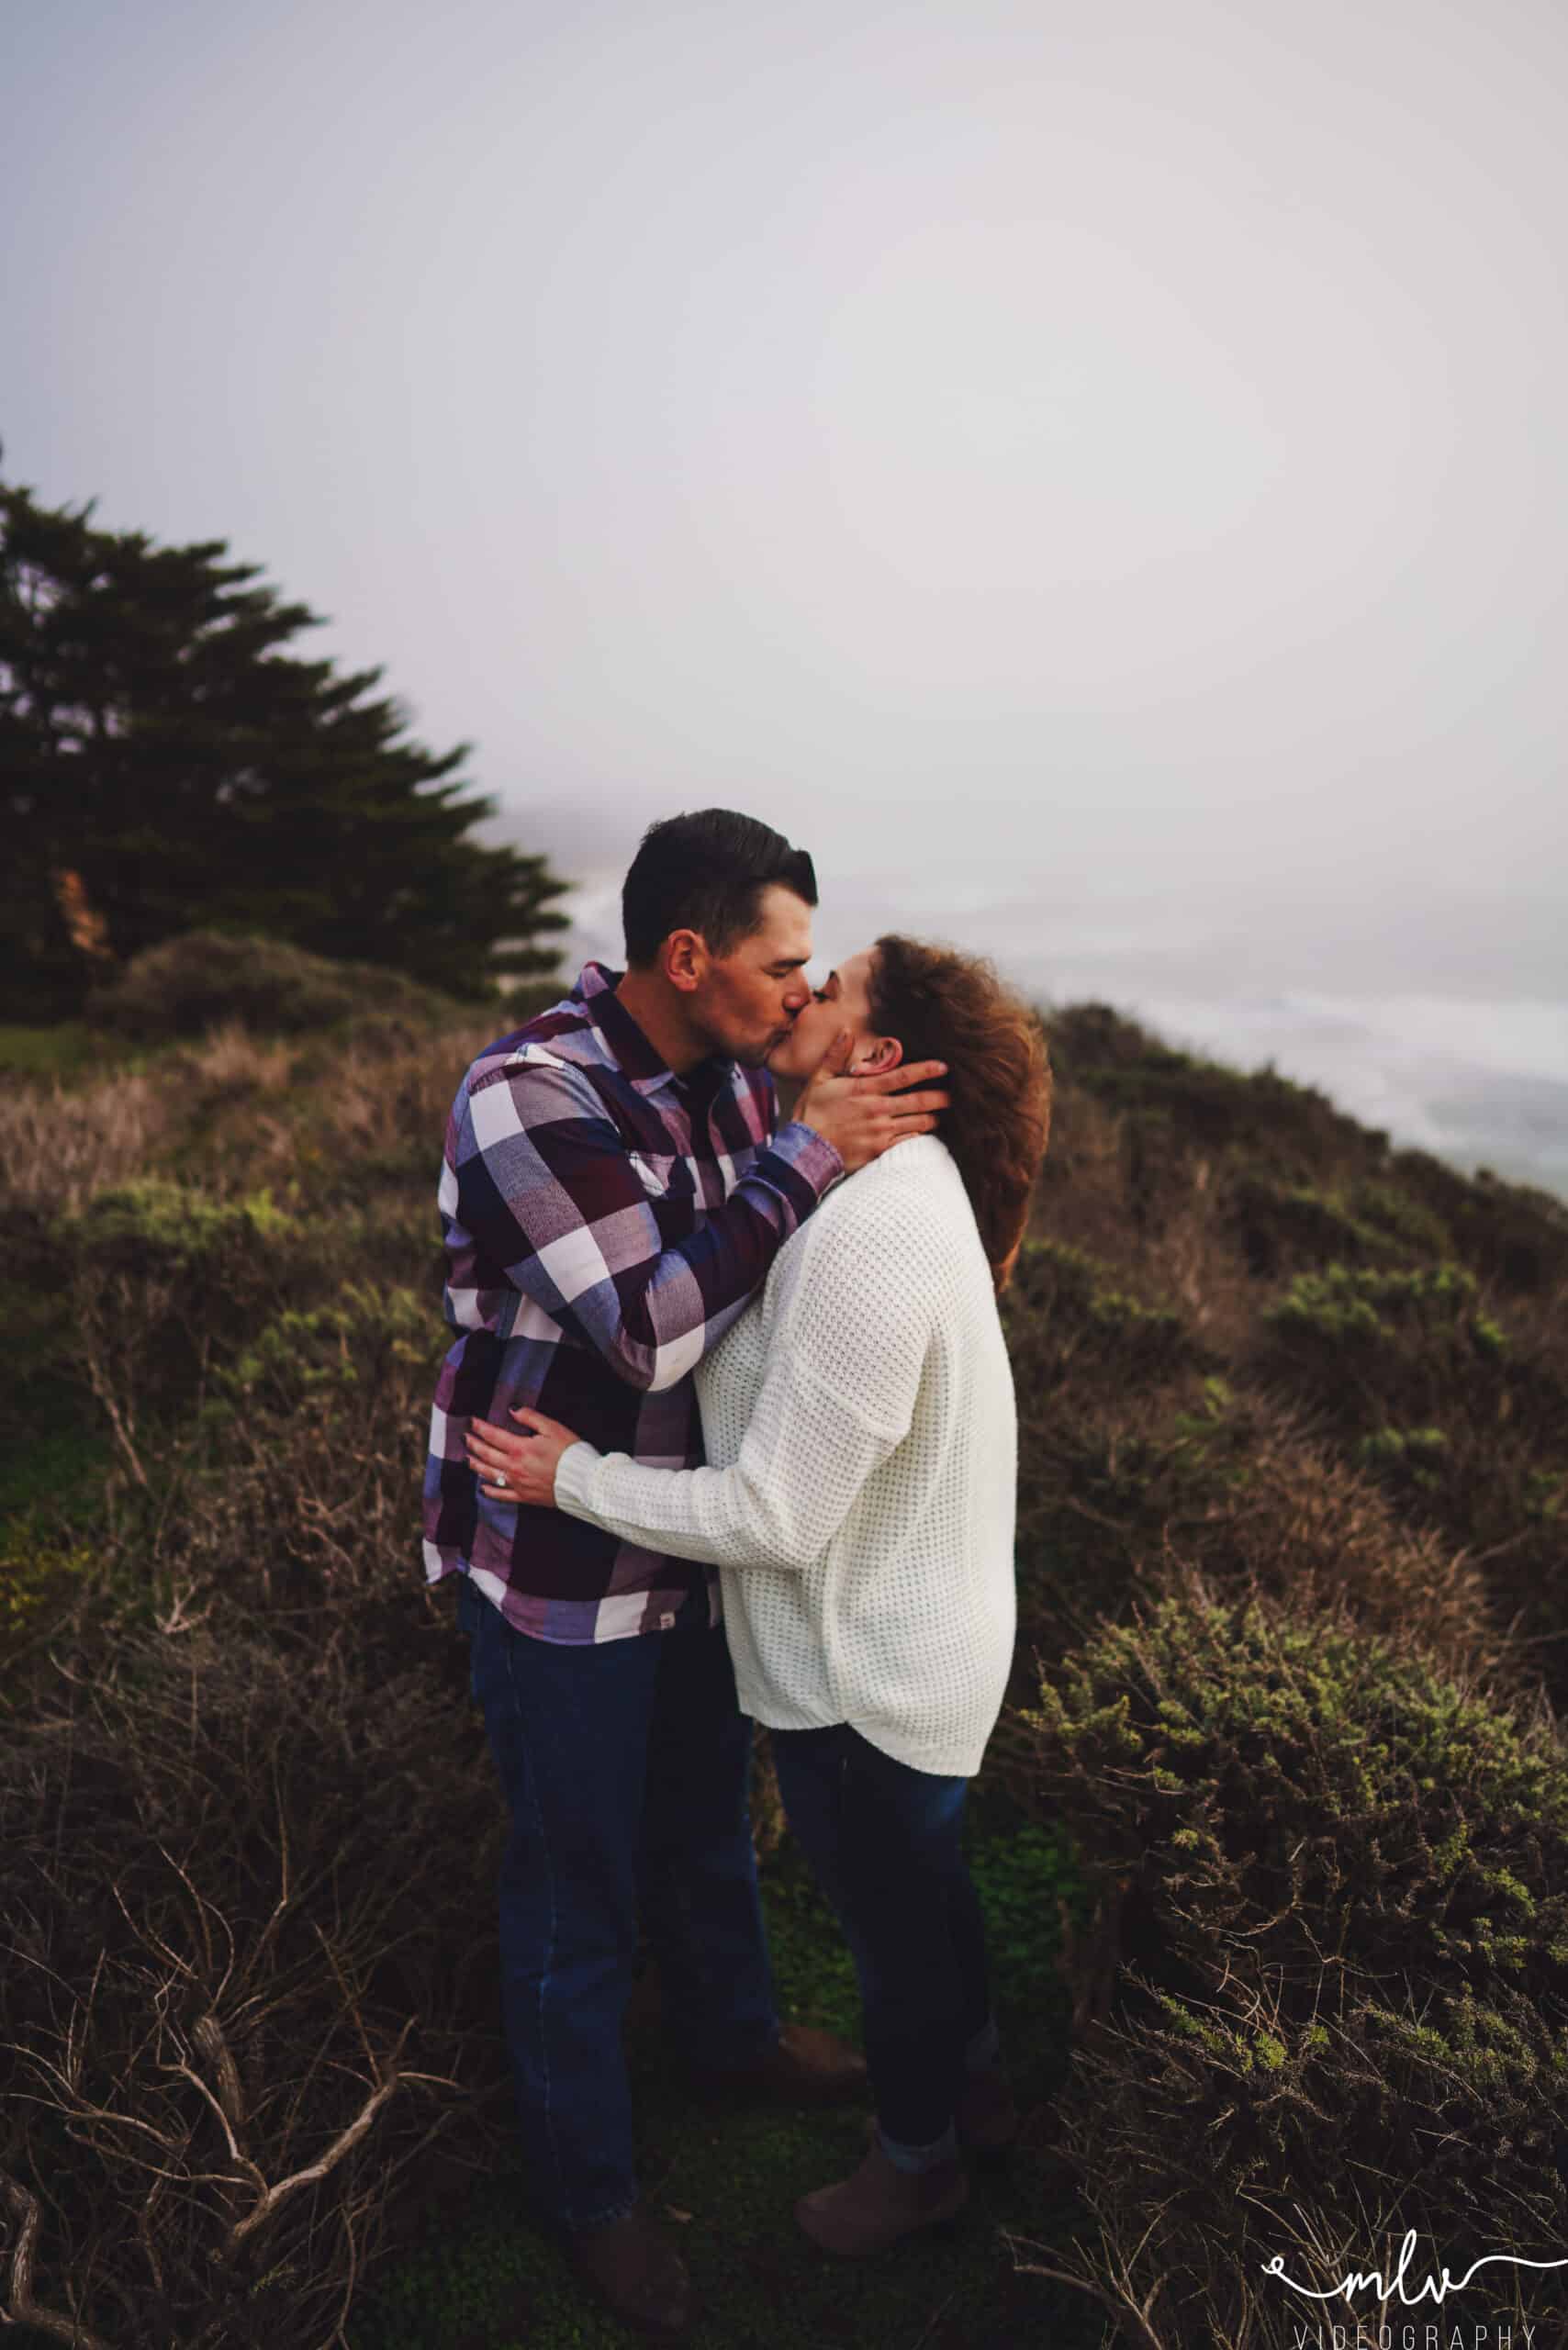 Engagement photography in Half Moon Bay California